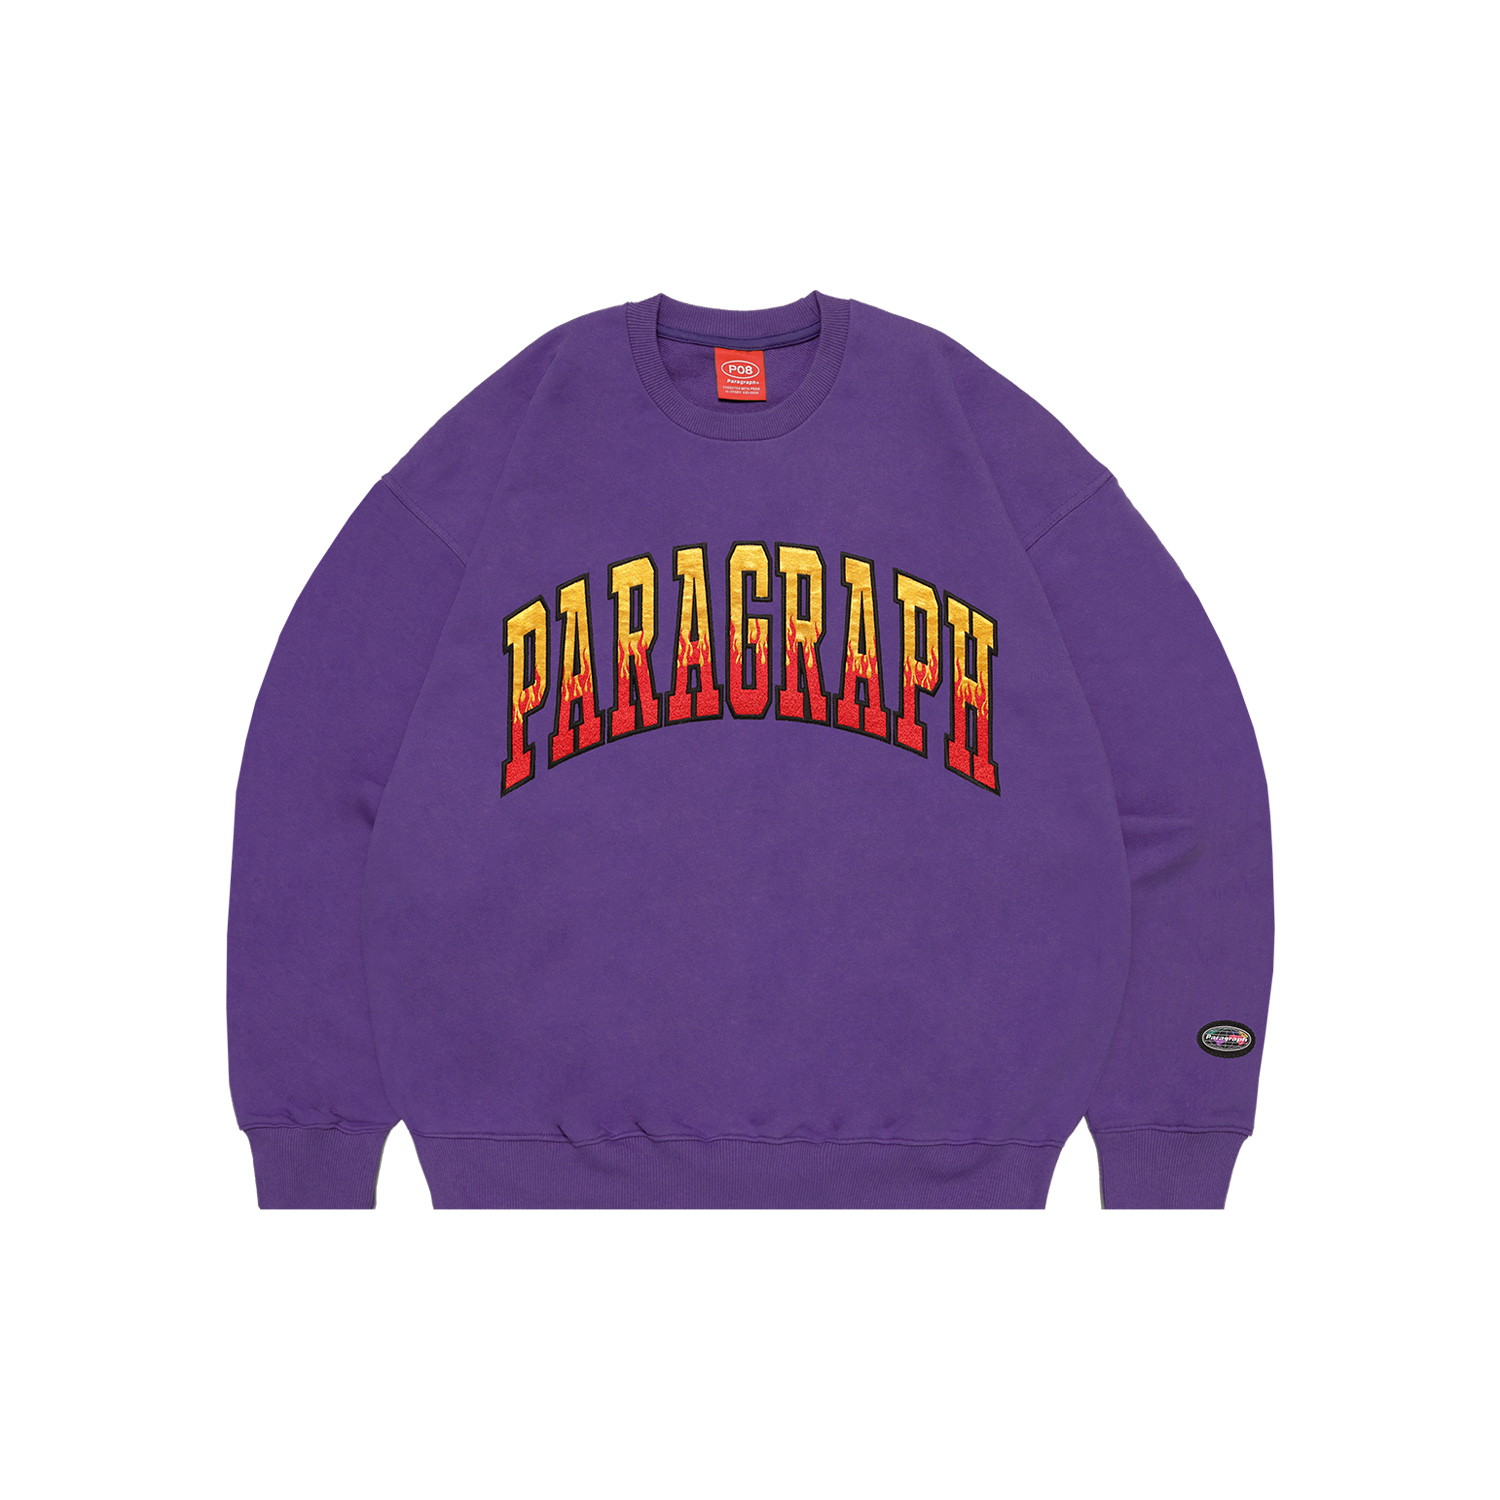 PARAGRAPH FLAME CREW9/25 출고